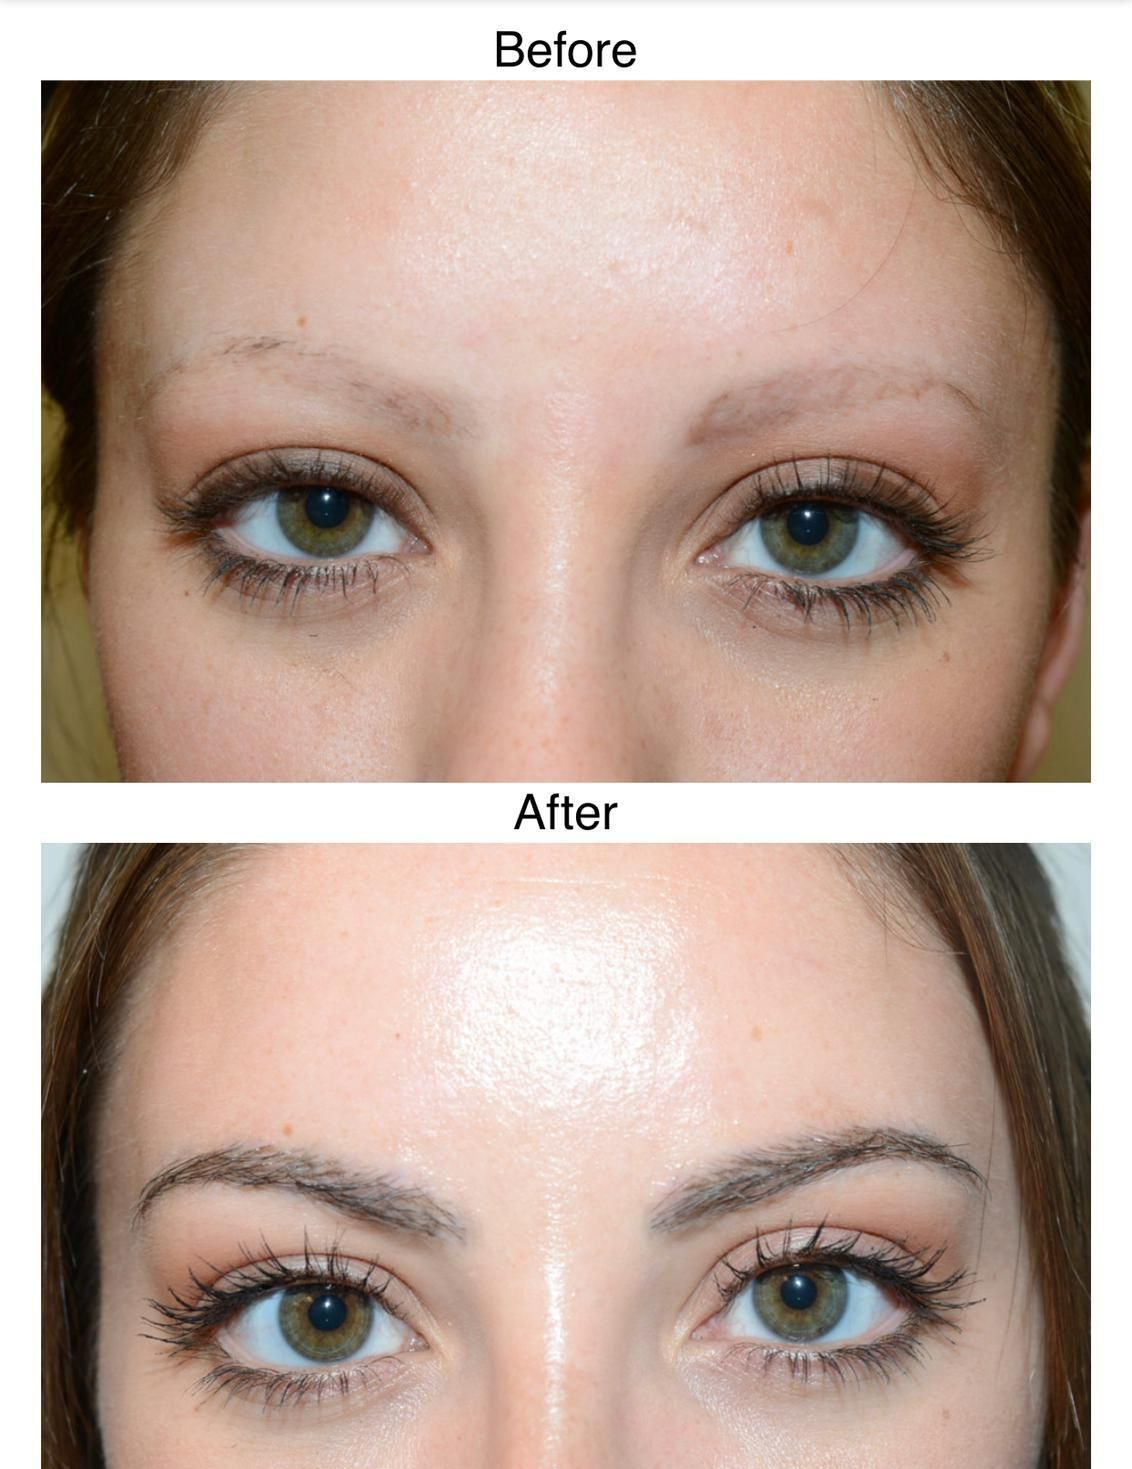 A before and after photo of a female eyebrow hair transplant